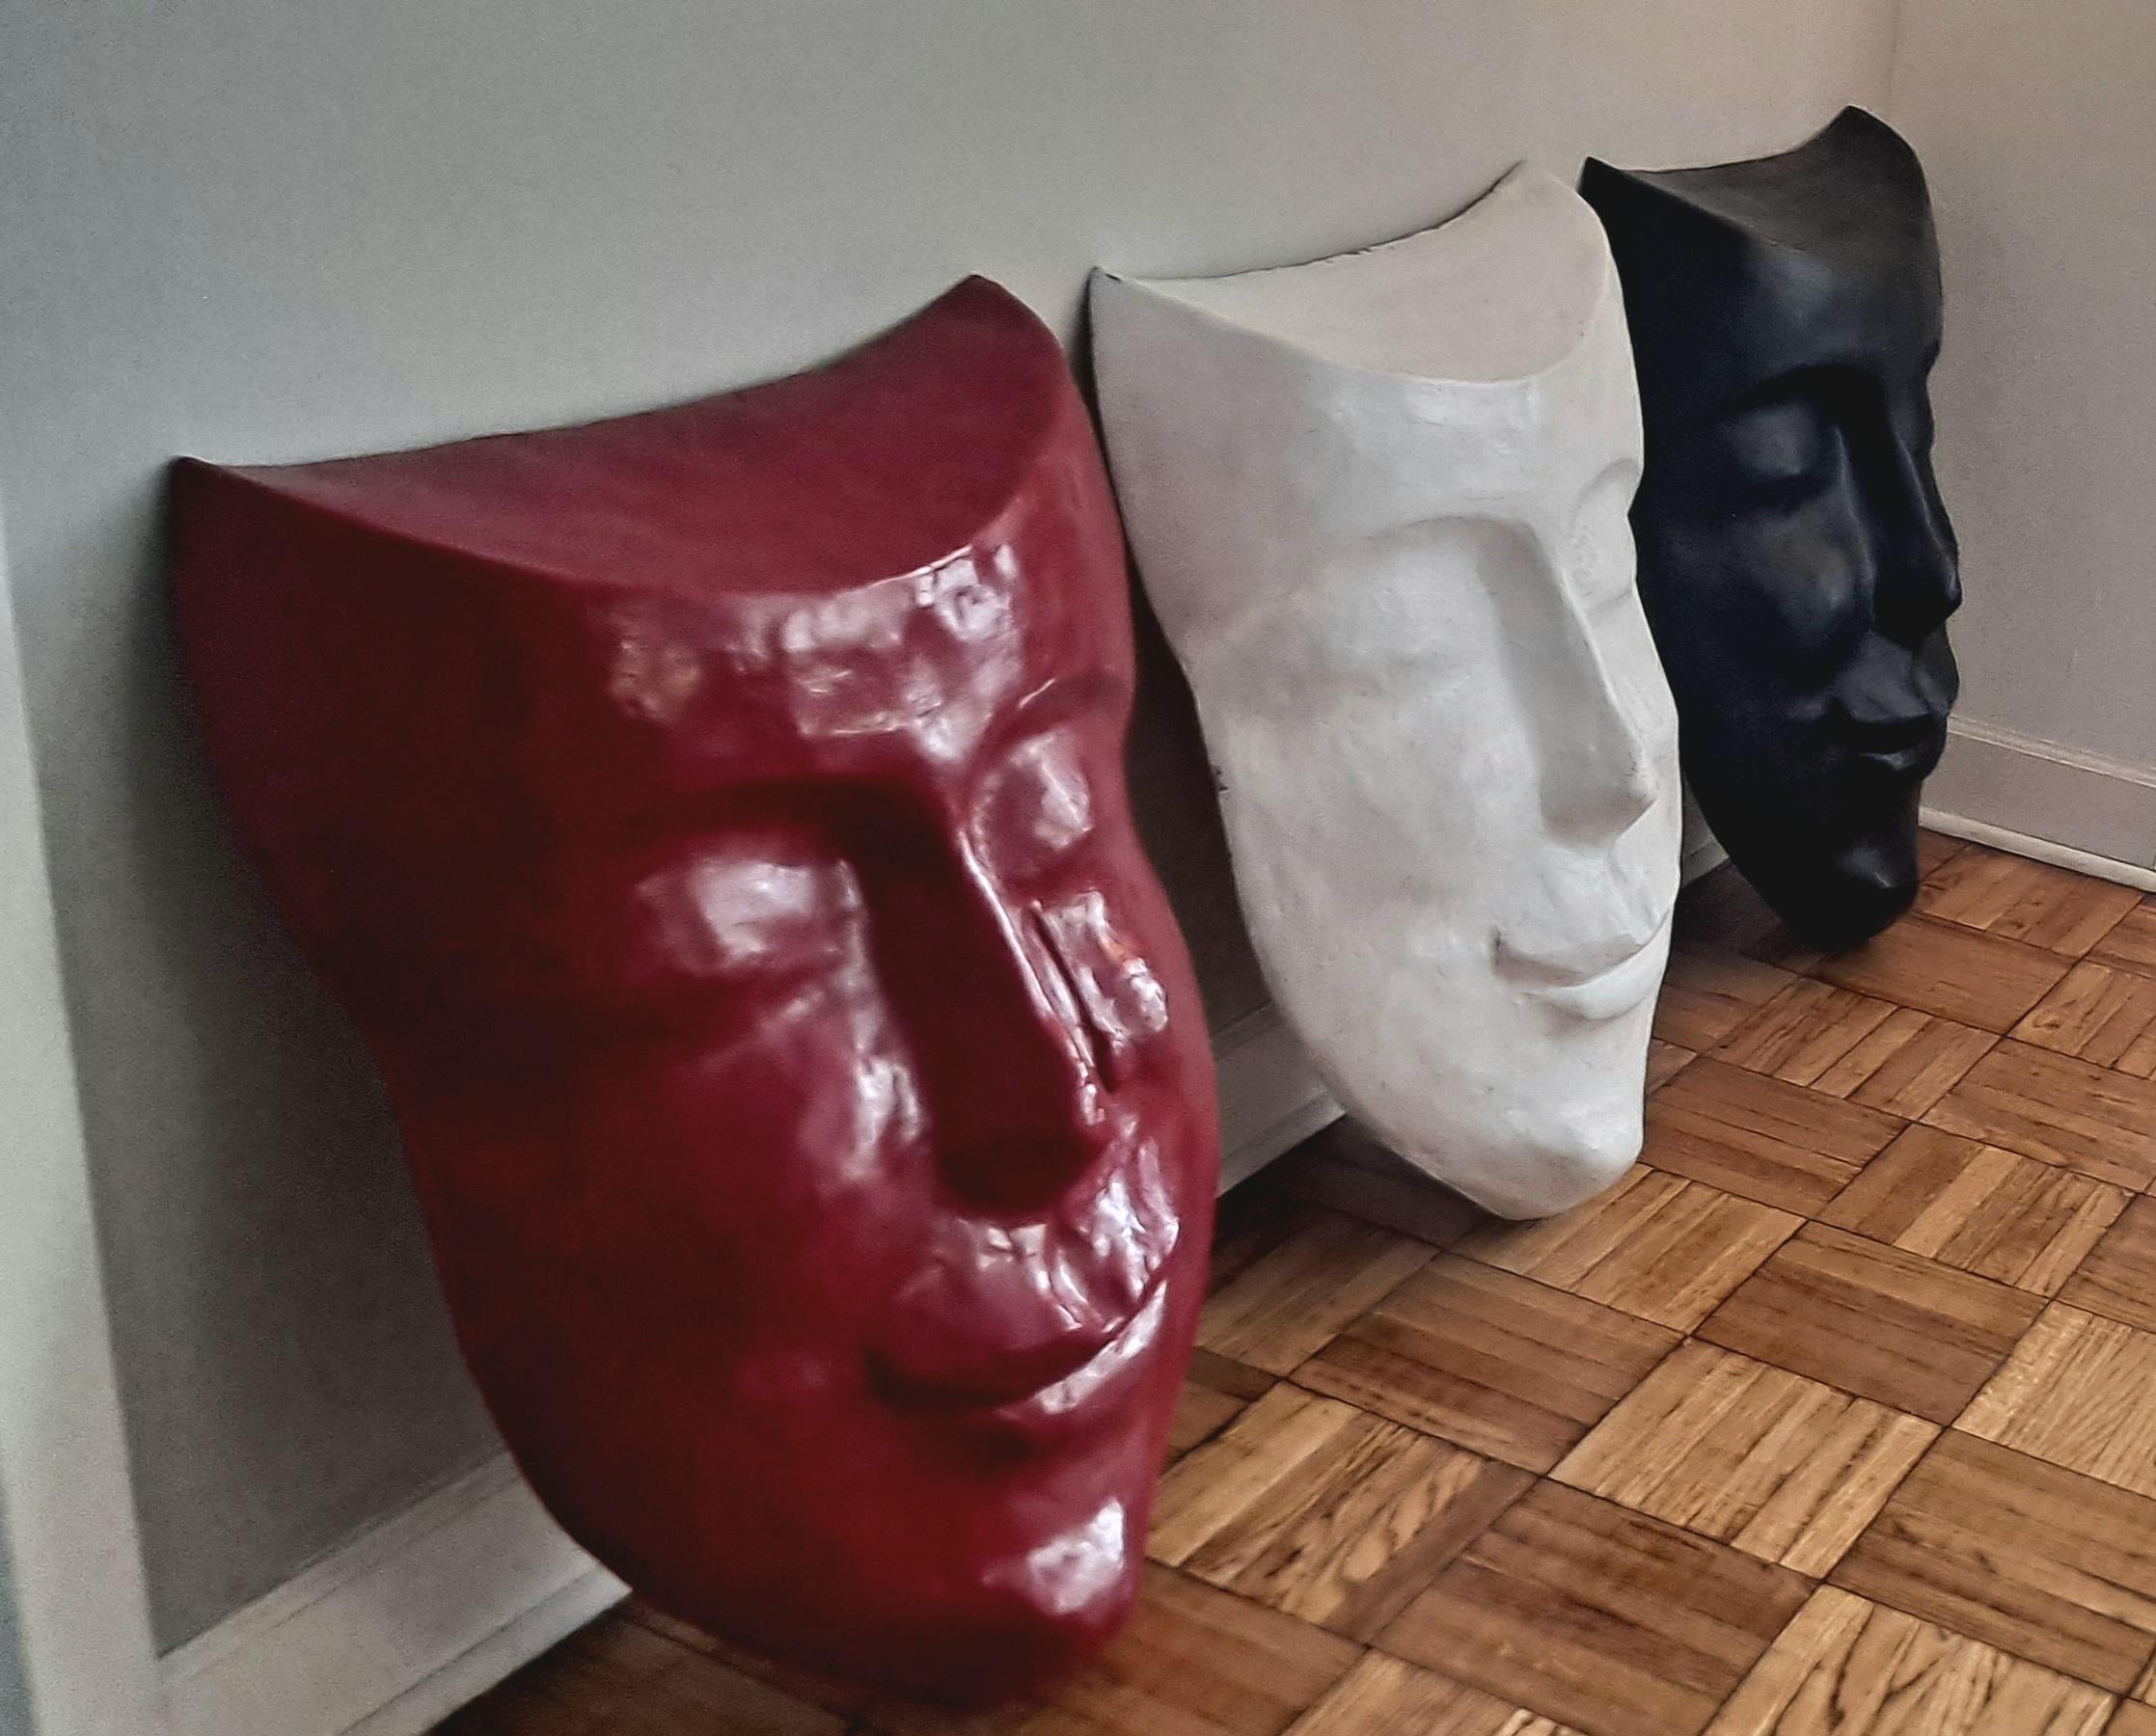 Bologna Artist sculpture the set of three mask. This are mid century original mask from Italy.We can sell them individually upon request .